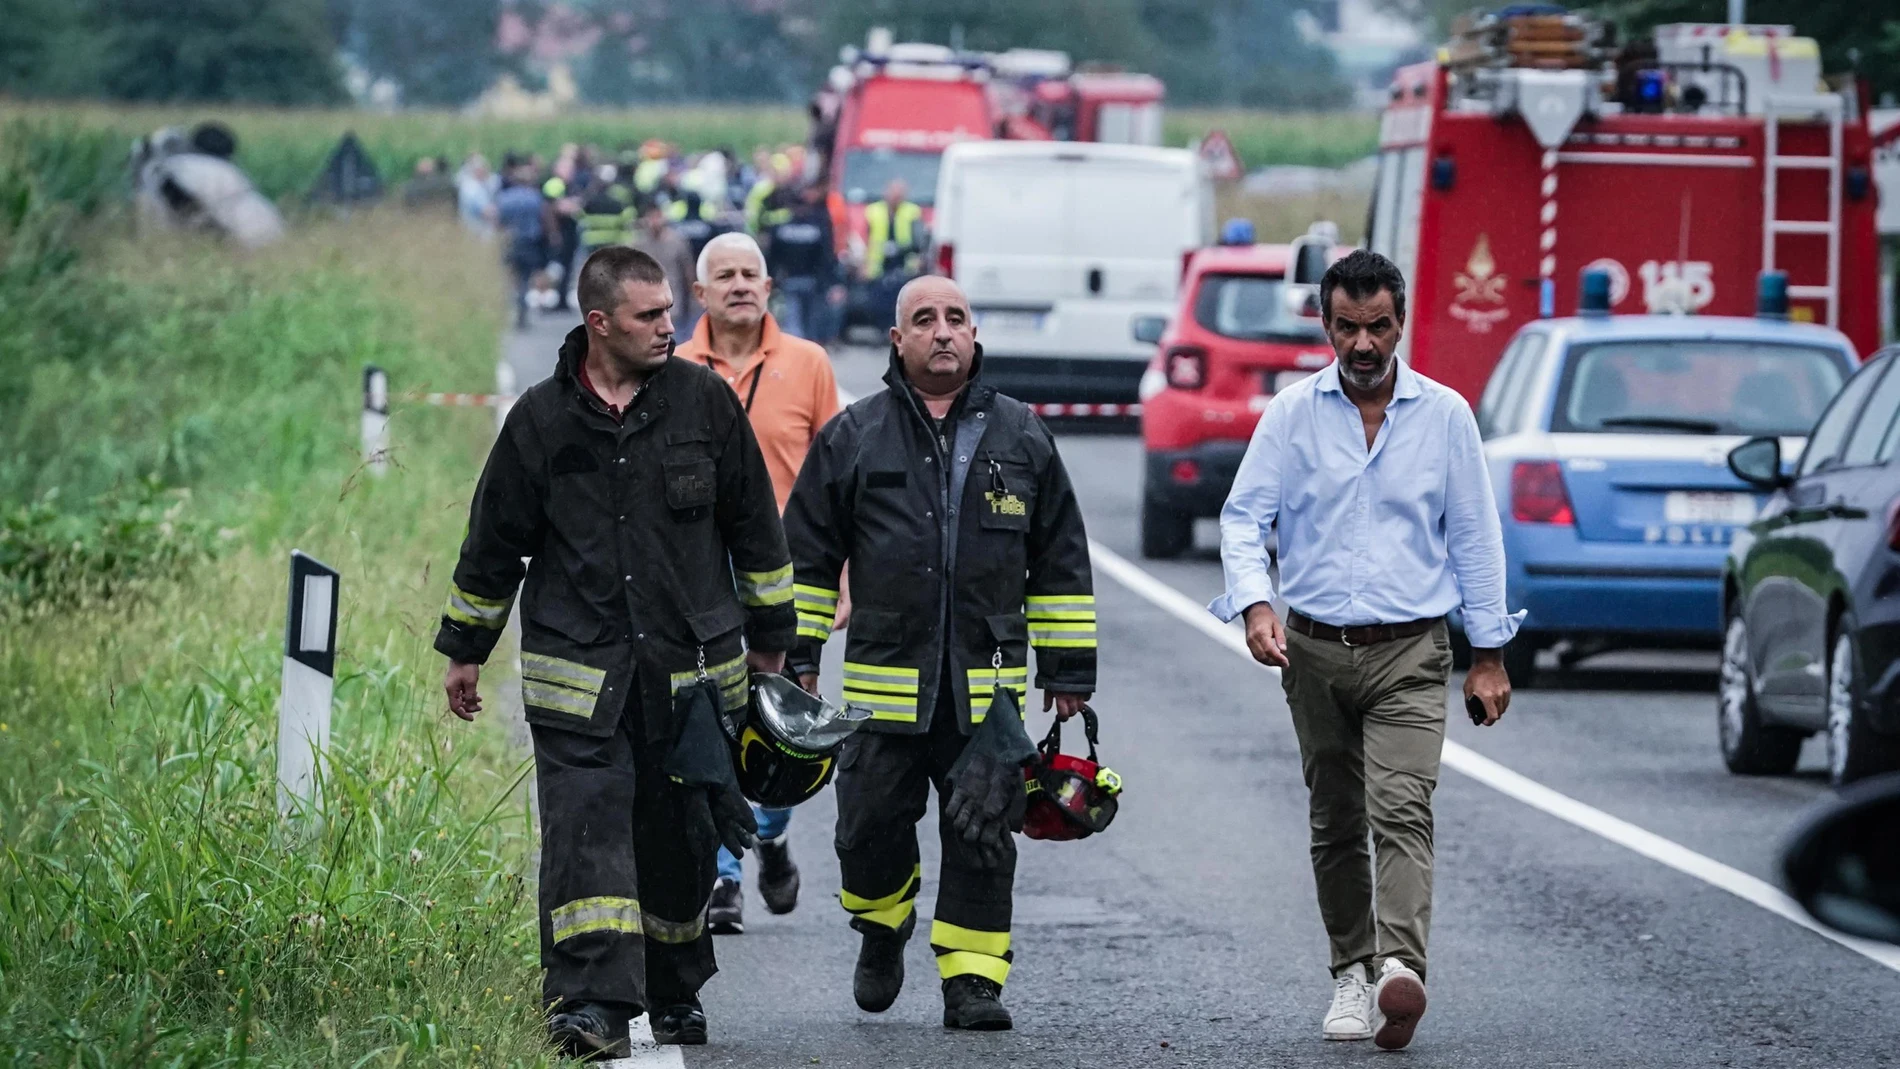 Turin (Italy), 16/09/2023.- Vigili del Fuoco fire and rescue service members gather at the site of a plane crash near the airport of Caselle, Turin, northern Italy, 16 September 2023. A plane of the Frecce Tricolori, the aerobatic demonstration team of the Italian Air Force, crashed in the area of Turin's Caselle airport. The pilot escaped by parachuting while a five-year-old girl died in the crash. The aircraft crashed at the bottom of a runway, involving a car, according to initial reports....